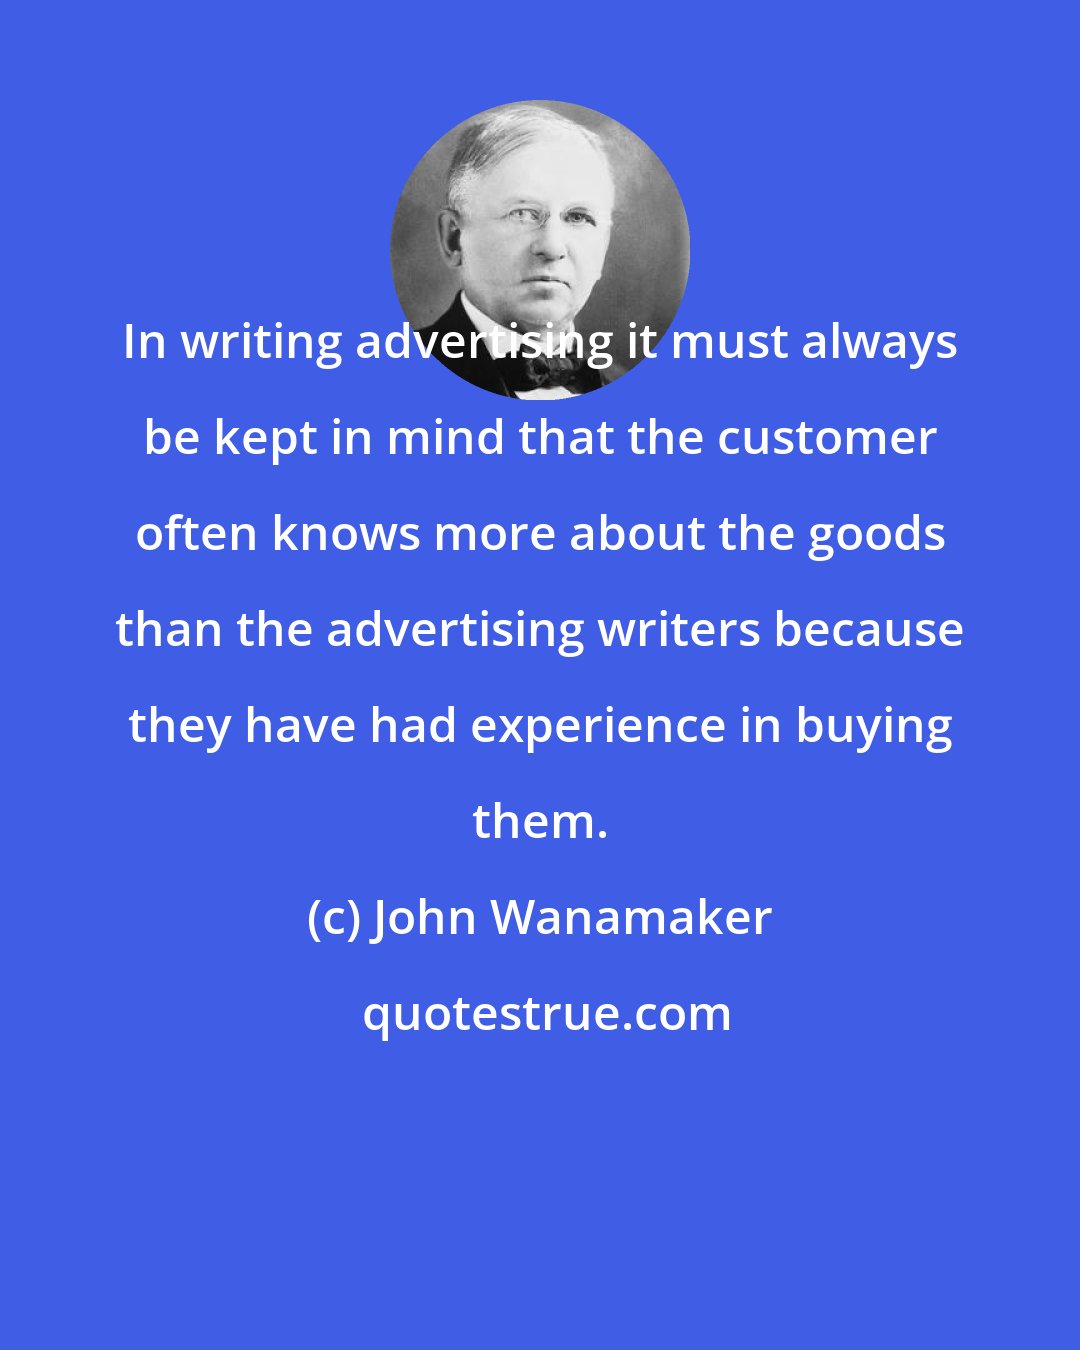 John Wanamaker: In writing advertising it must always be kept in mind that the customer often knows more about the goods than the advertising writers because they have had experience in buying them.